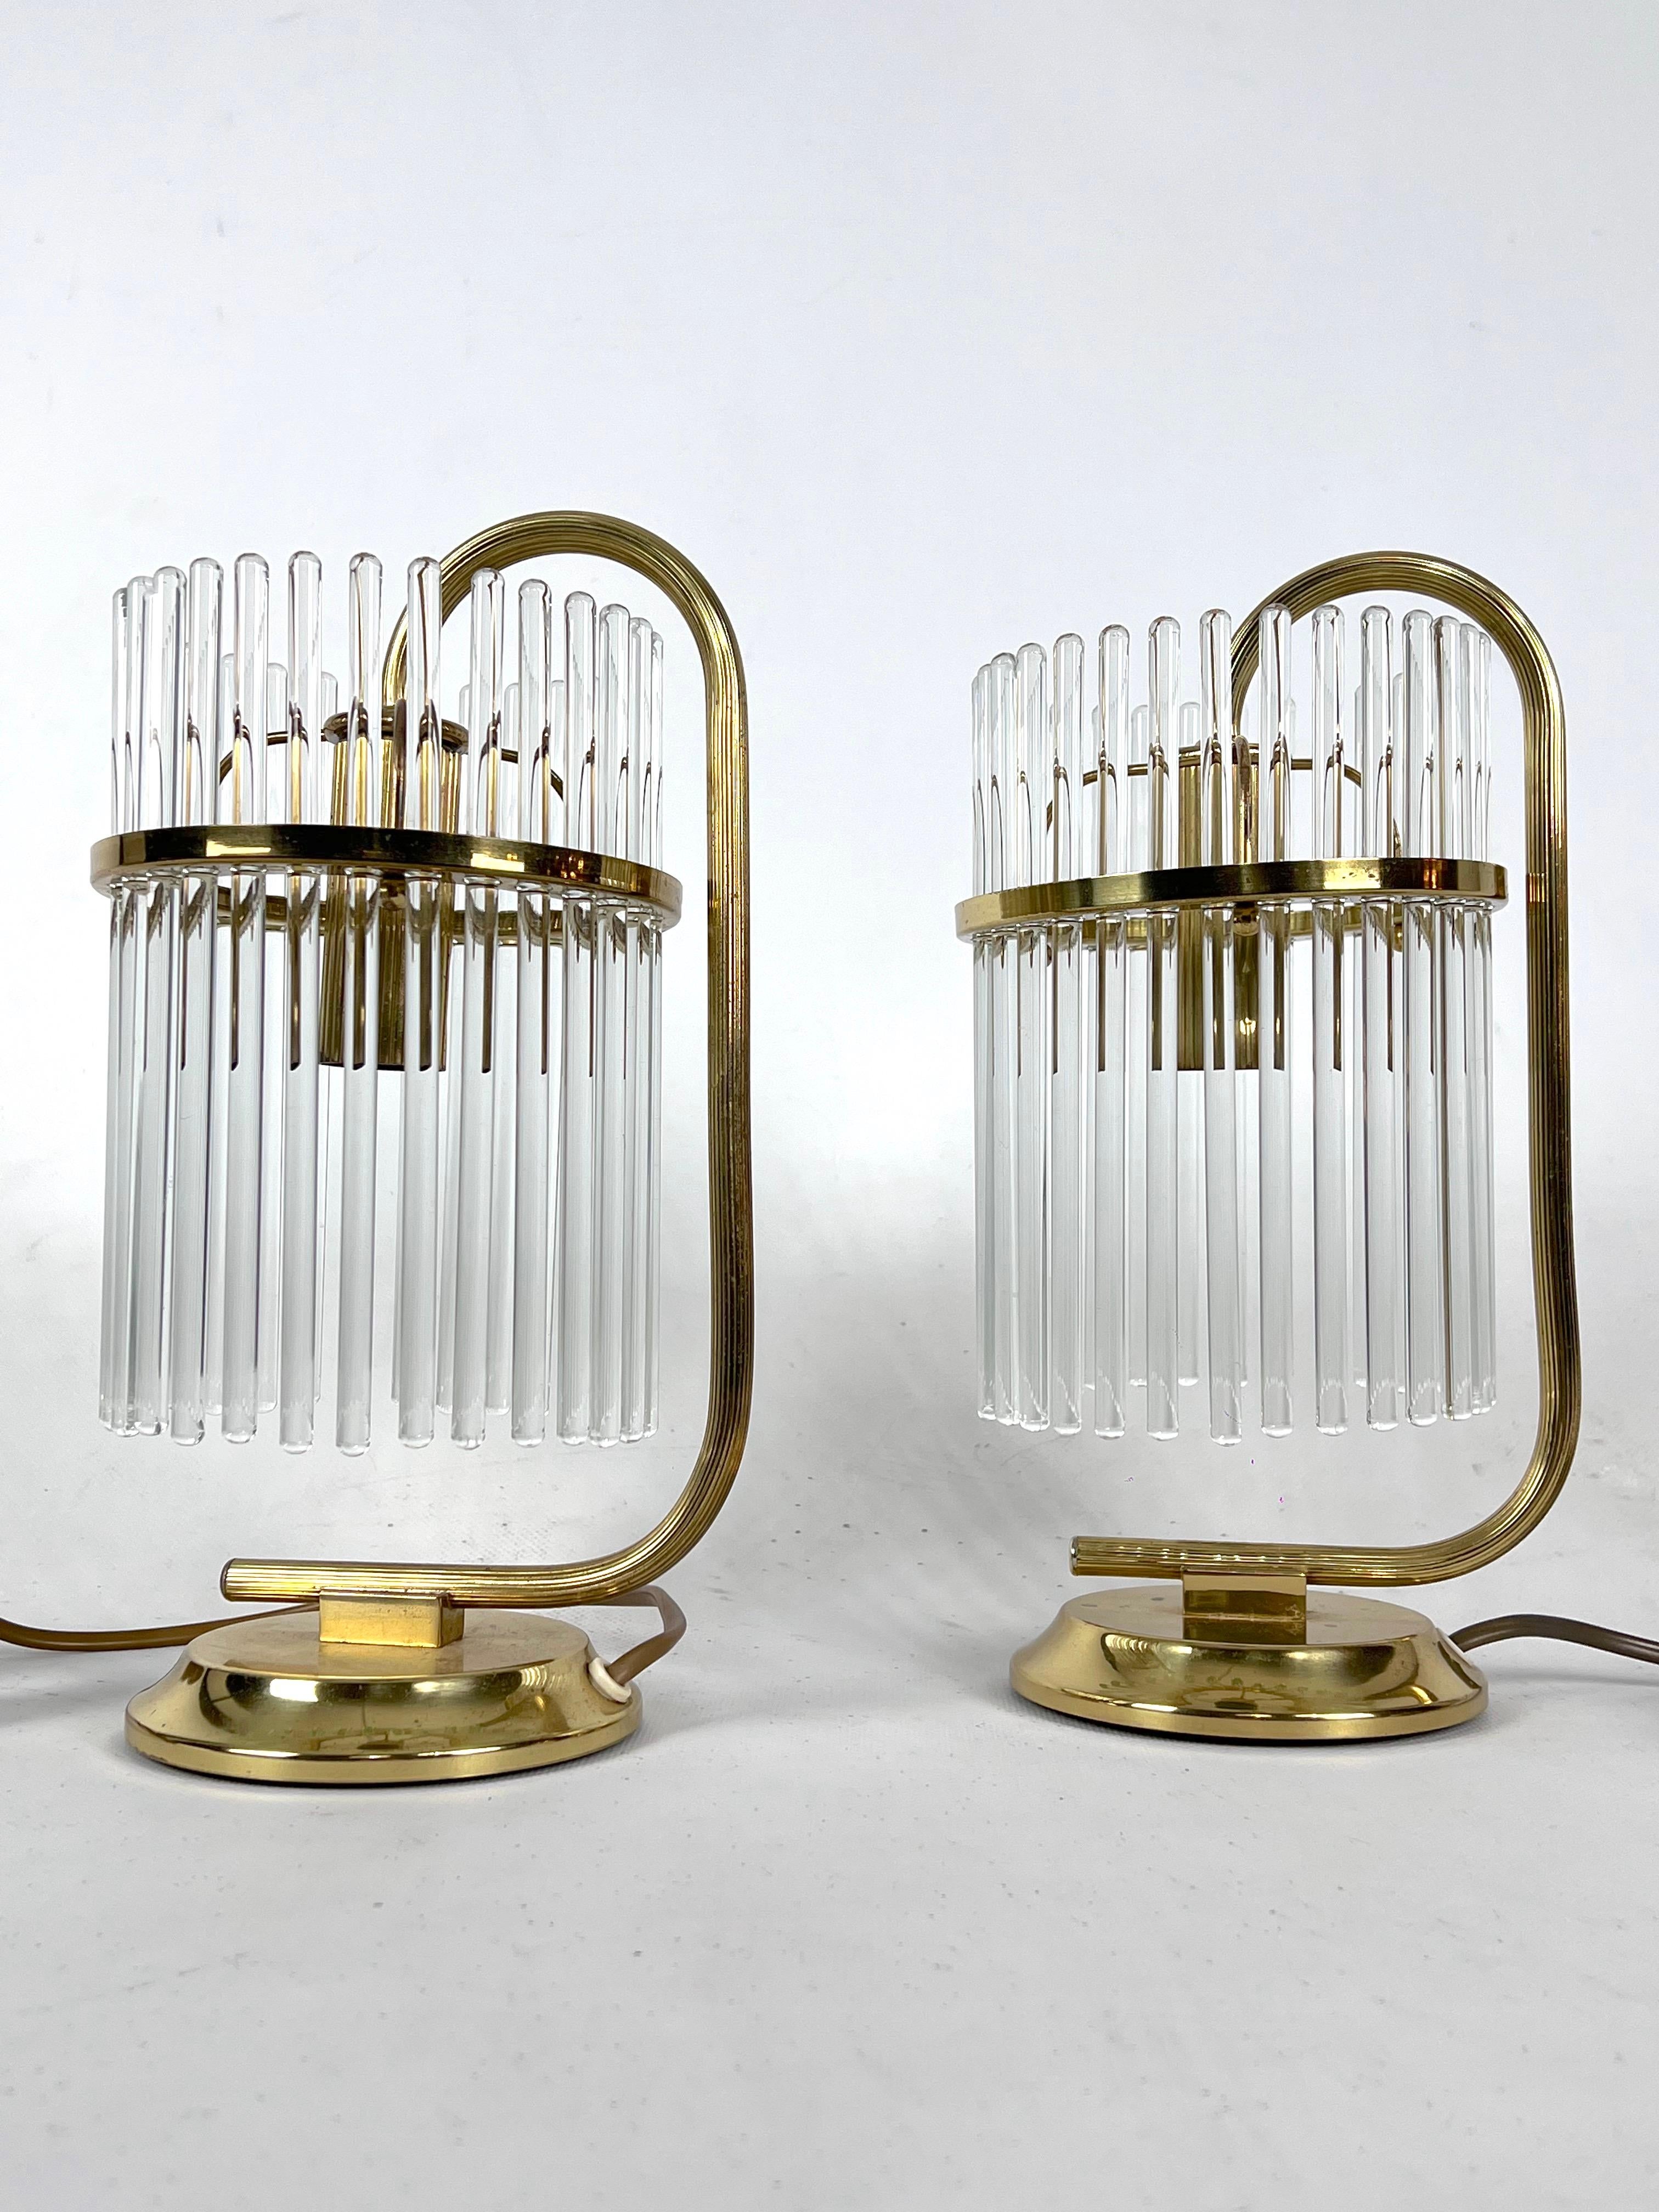 Vintage Italian Pair of Signed Brass Table Lamps by Sciolari, Italy, 1970s For Sale 4